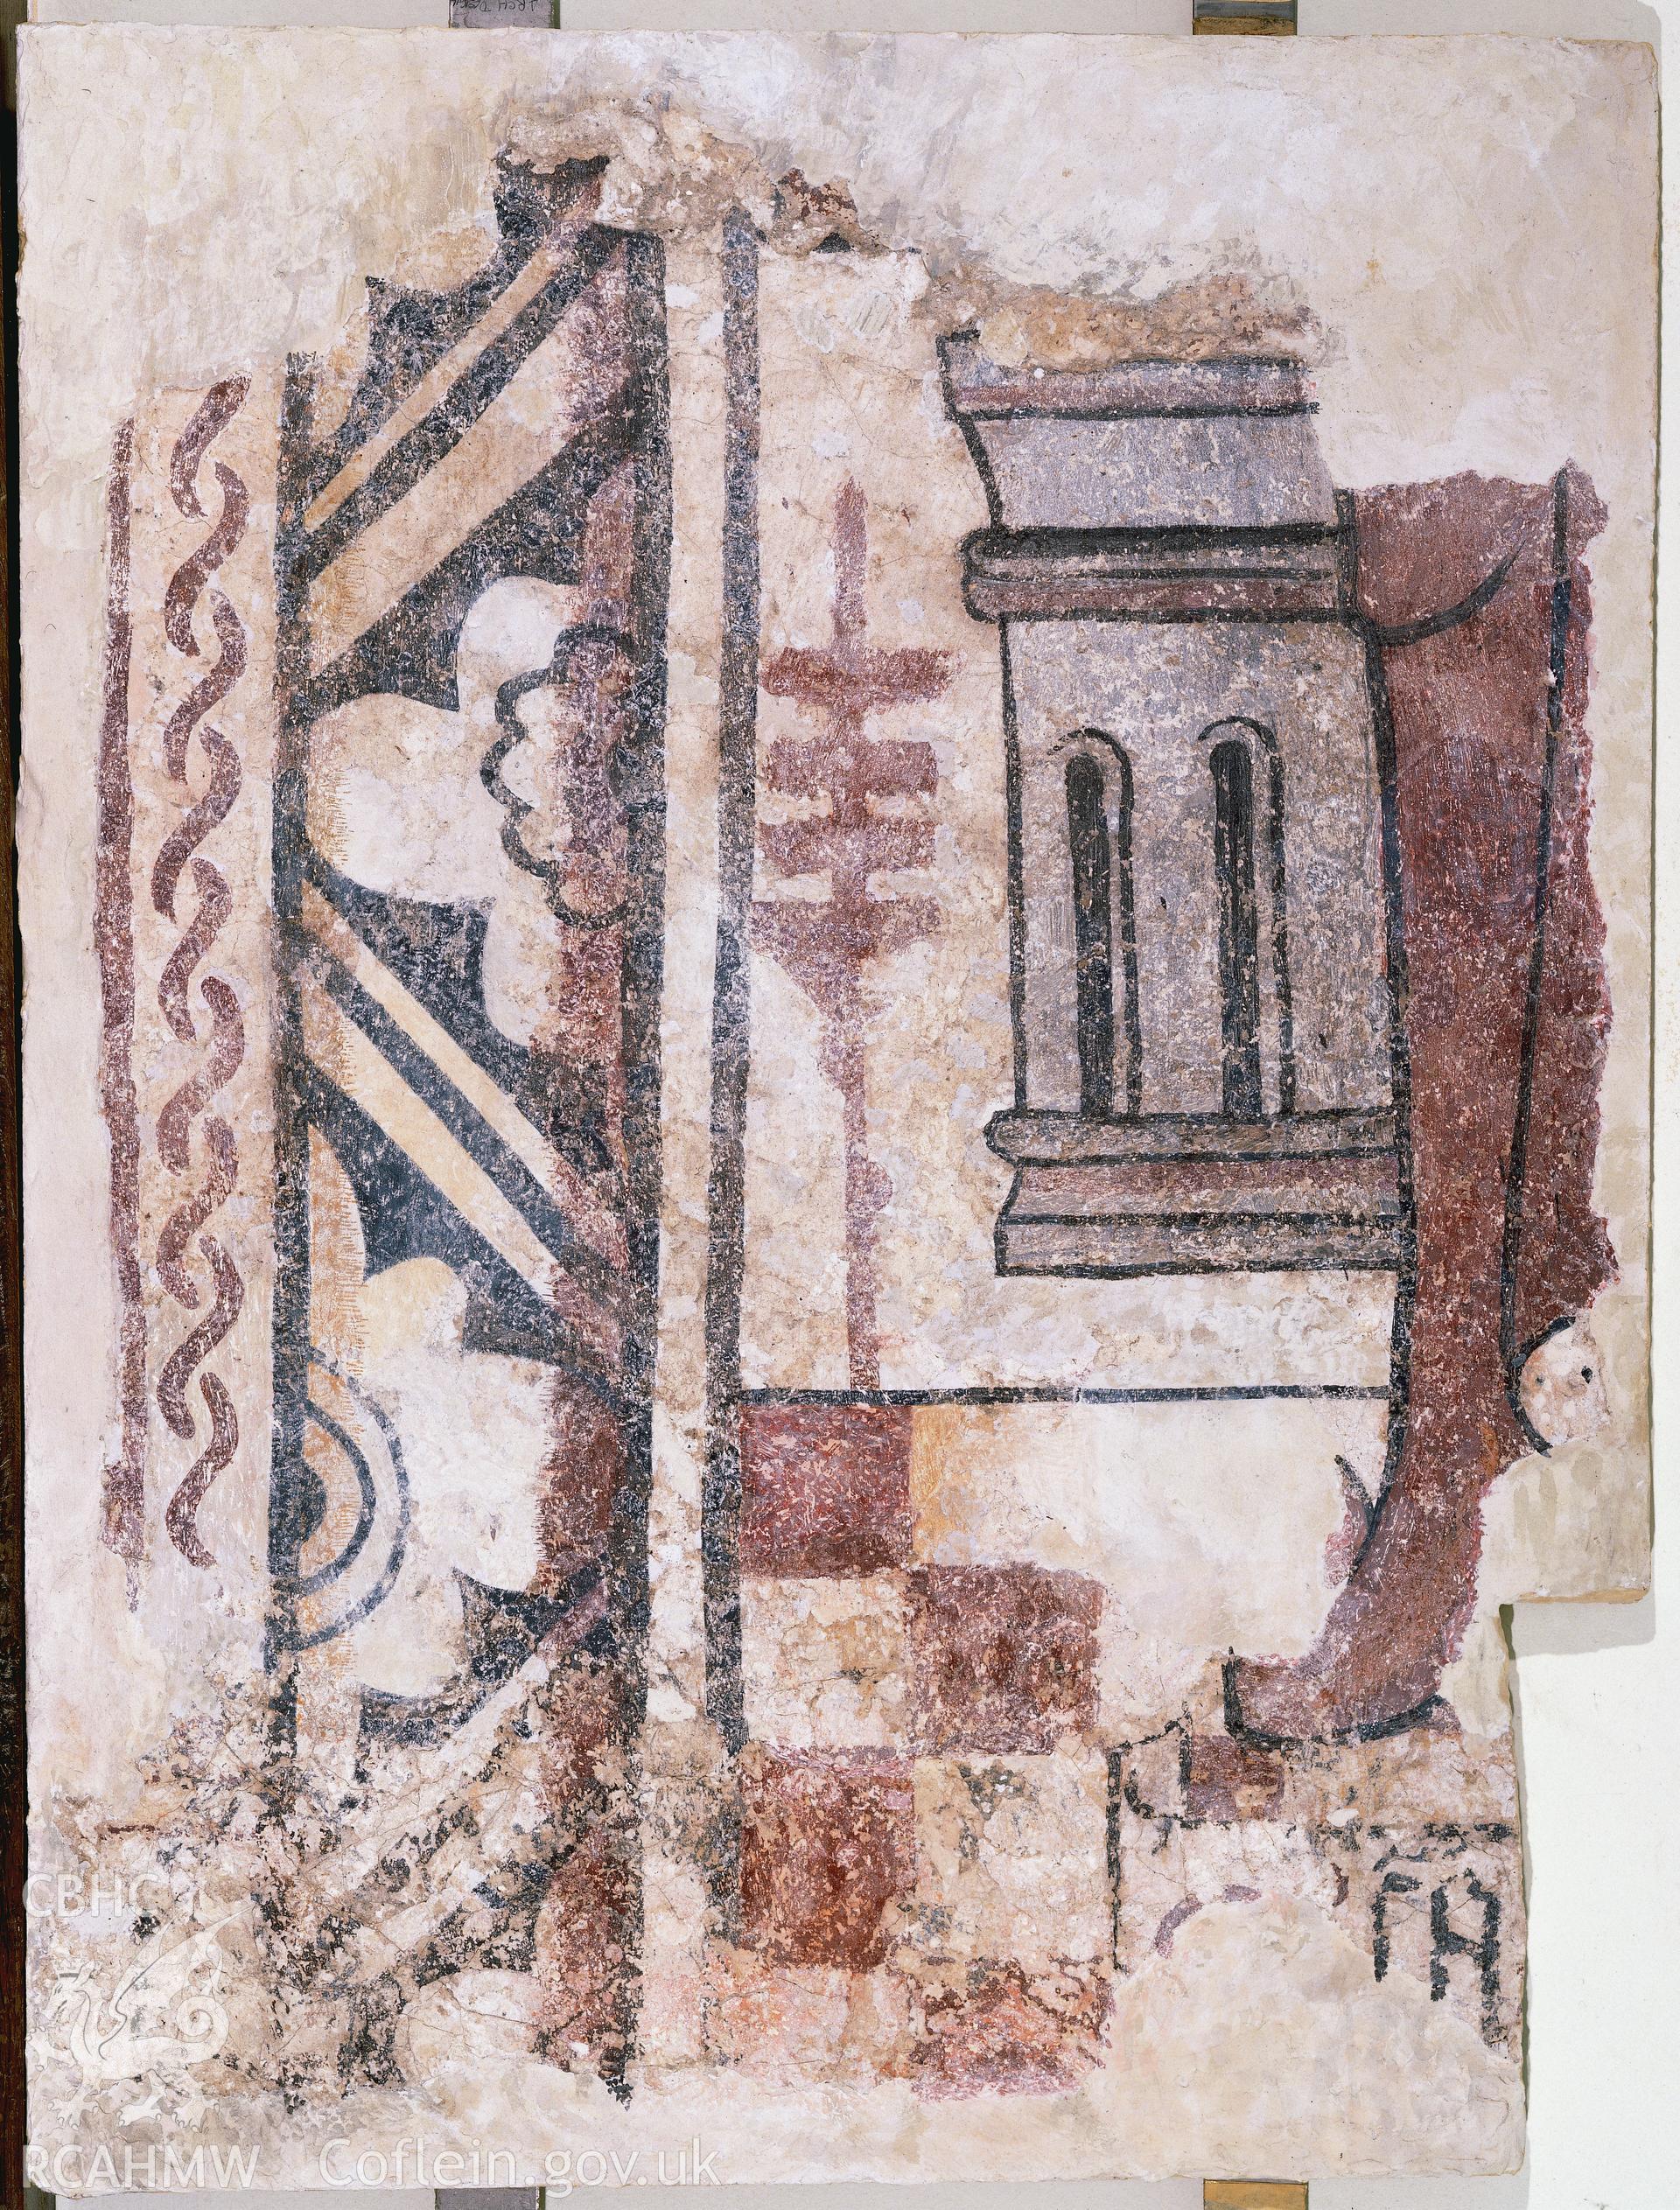 RCAHMW colour transparency of wallpainting at Llandeilo Talybont Church.